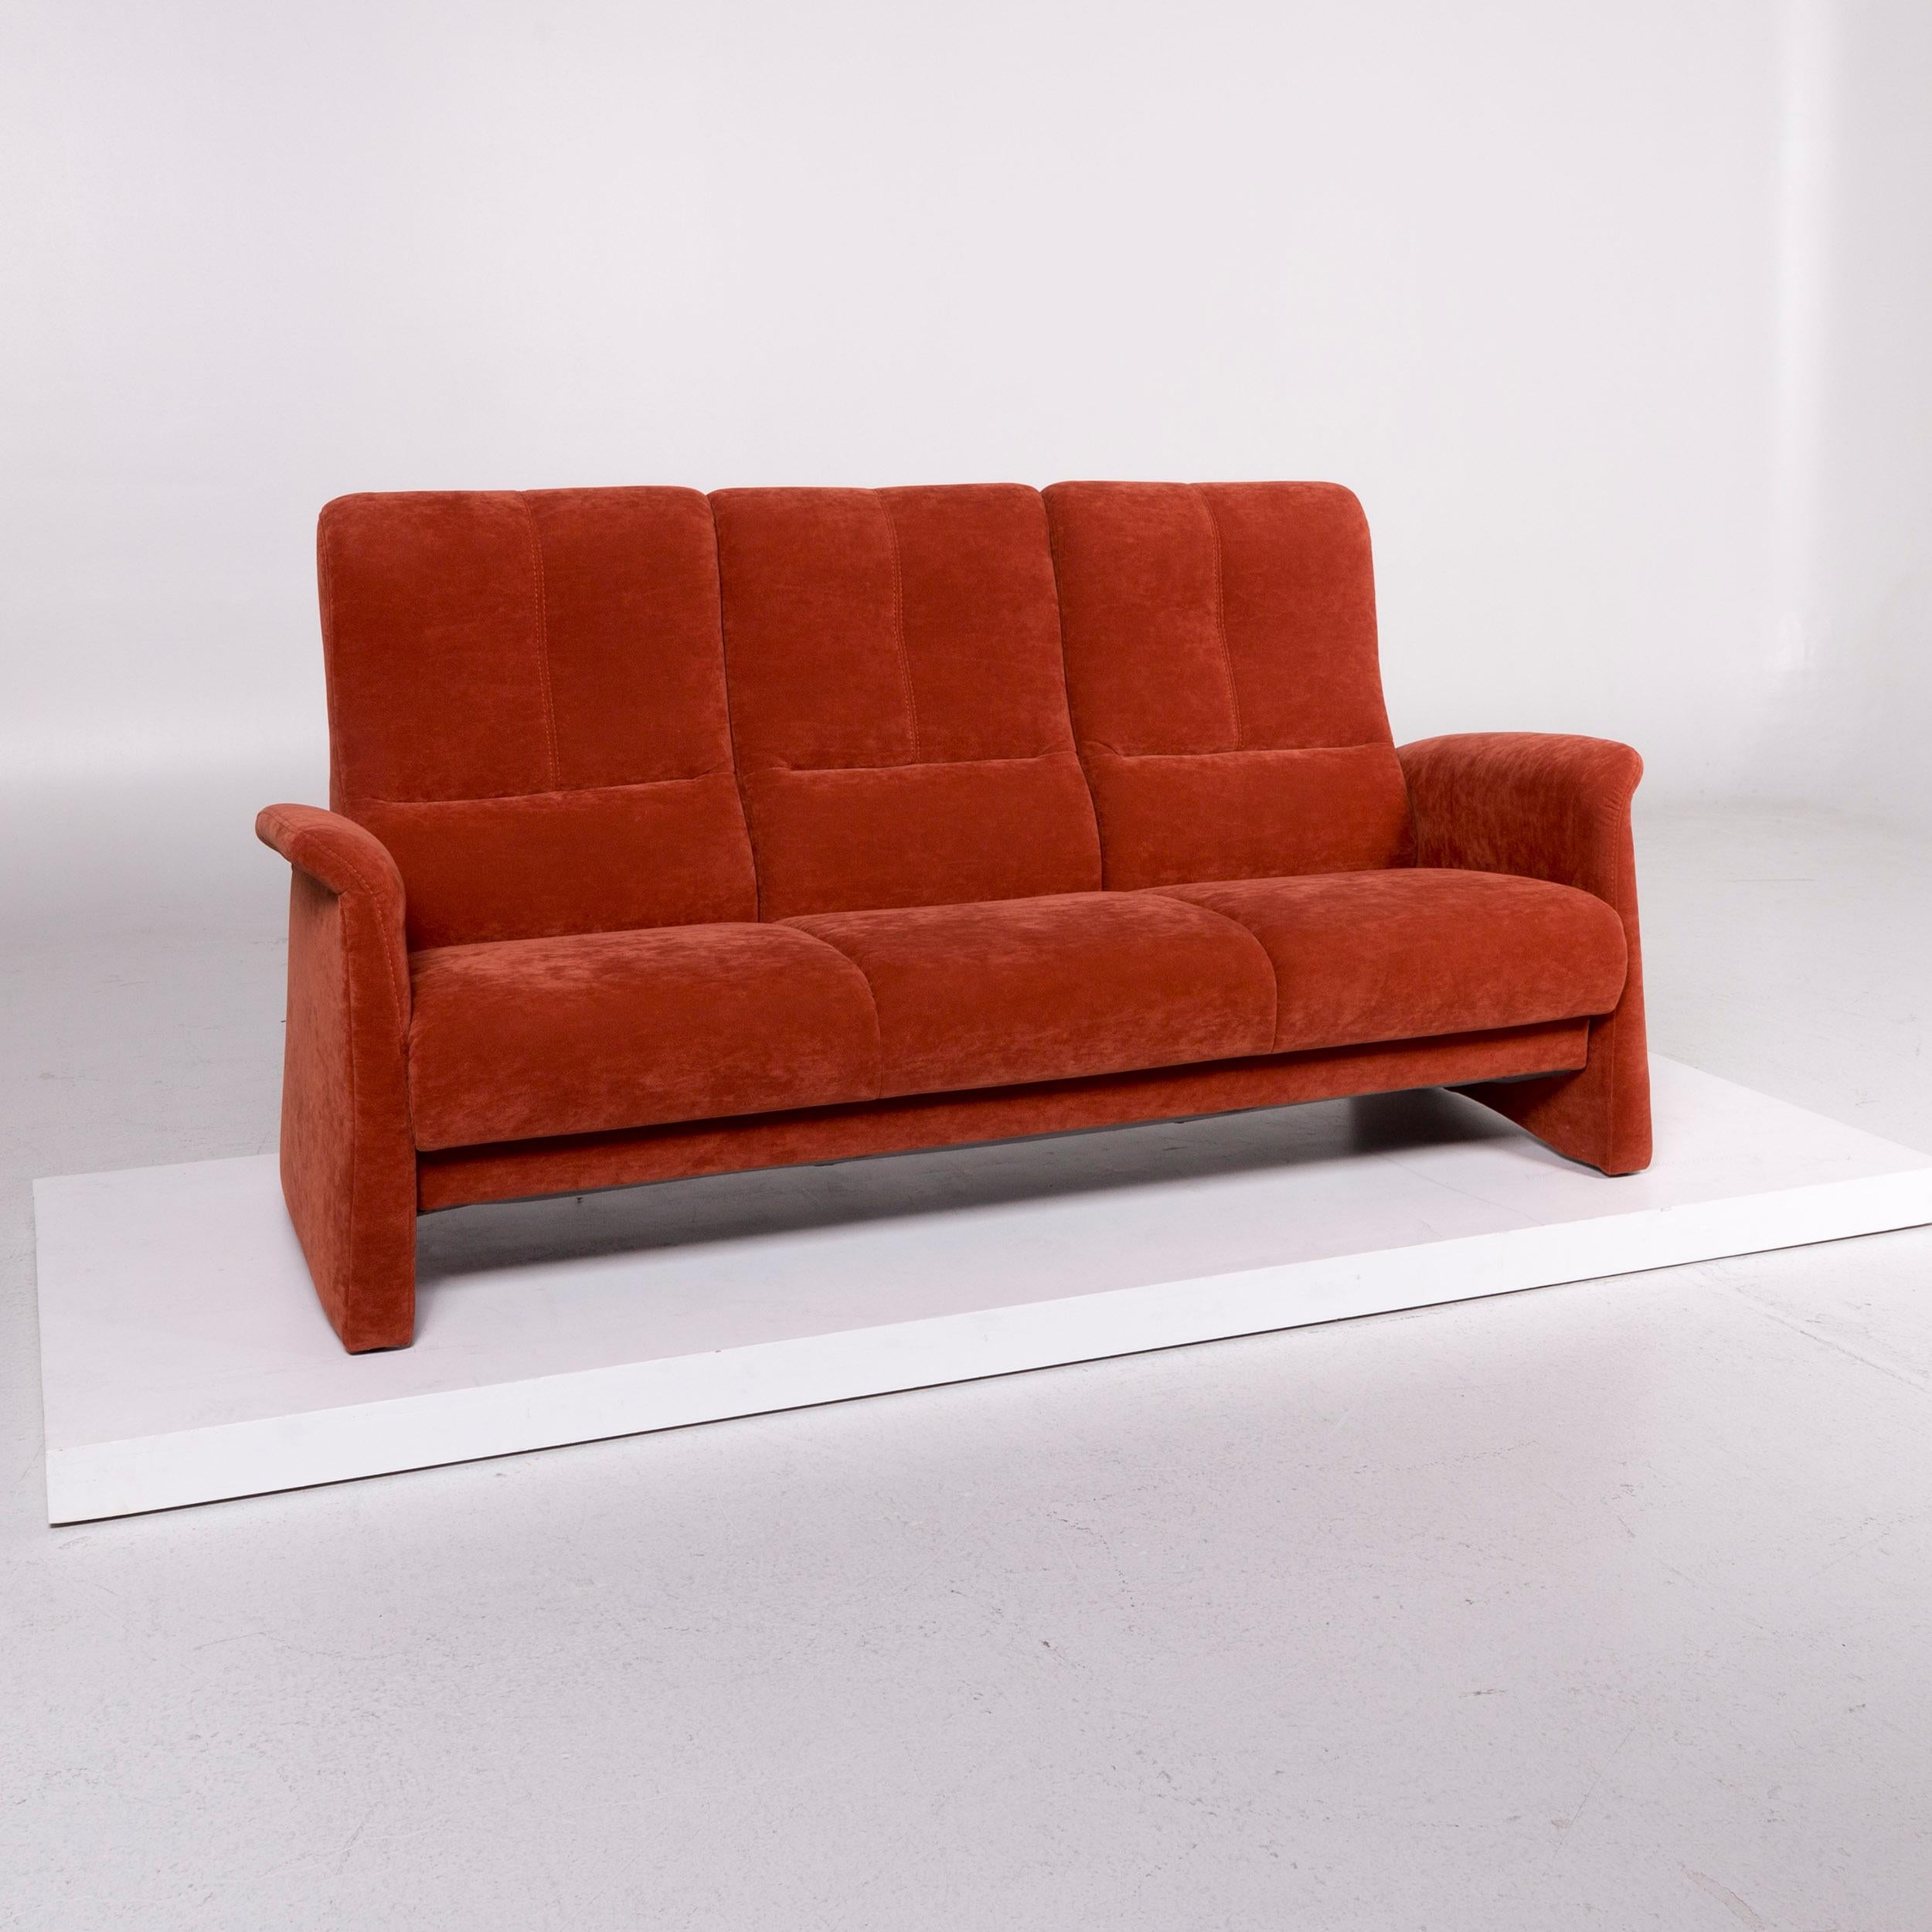 We bring to you a Himolla fabric sofa orange rust red three-seat couch.
   
 

 Product measurements in centimeters:
 

 Depth 83
Width 184
Height 95
Seat-height 42
Rest-height 59
Seat-depth 52
Seat-width 158
Back-height 56.